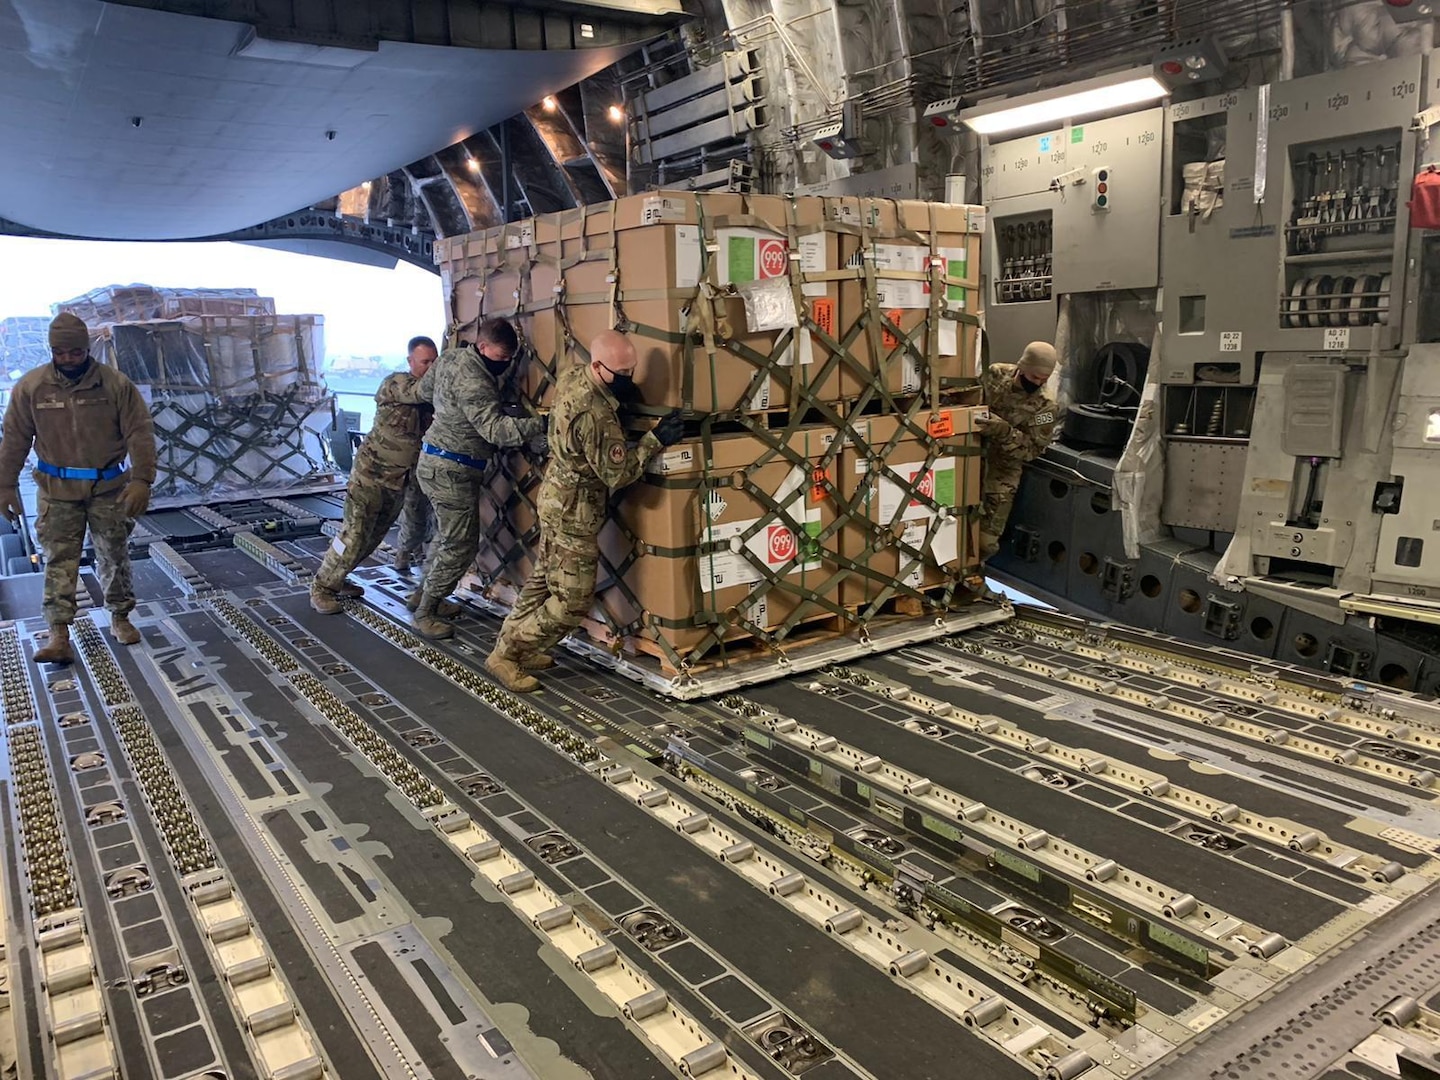 Airmen from the 721st Aerial Port Squadron push a pallet of rations onto a C-17 Globemaster III aircraft at Ramstein Air Base, Germany, Nov. 26, 2020.